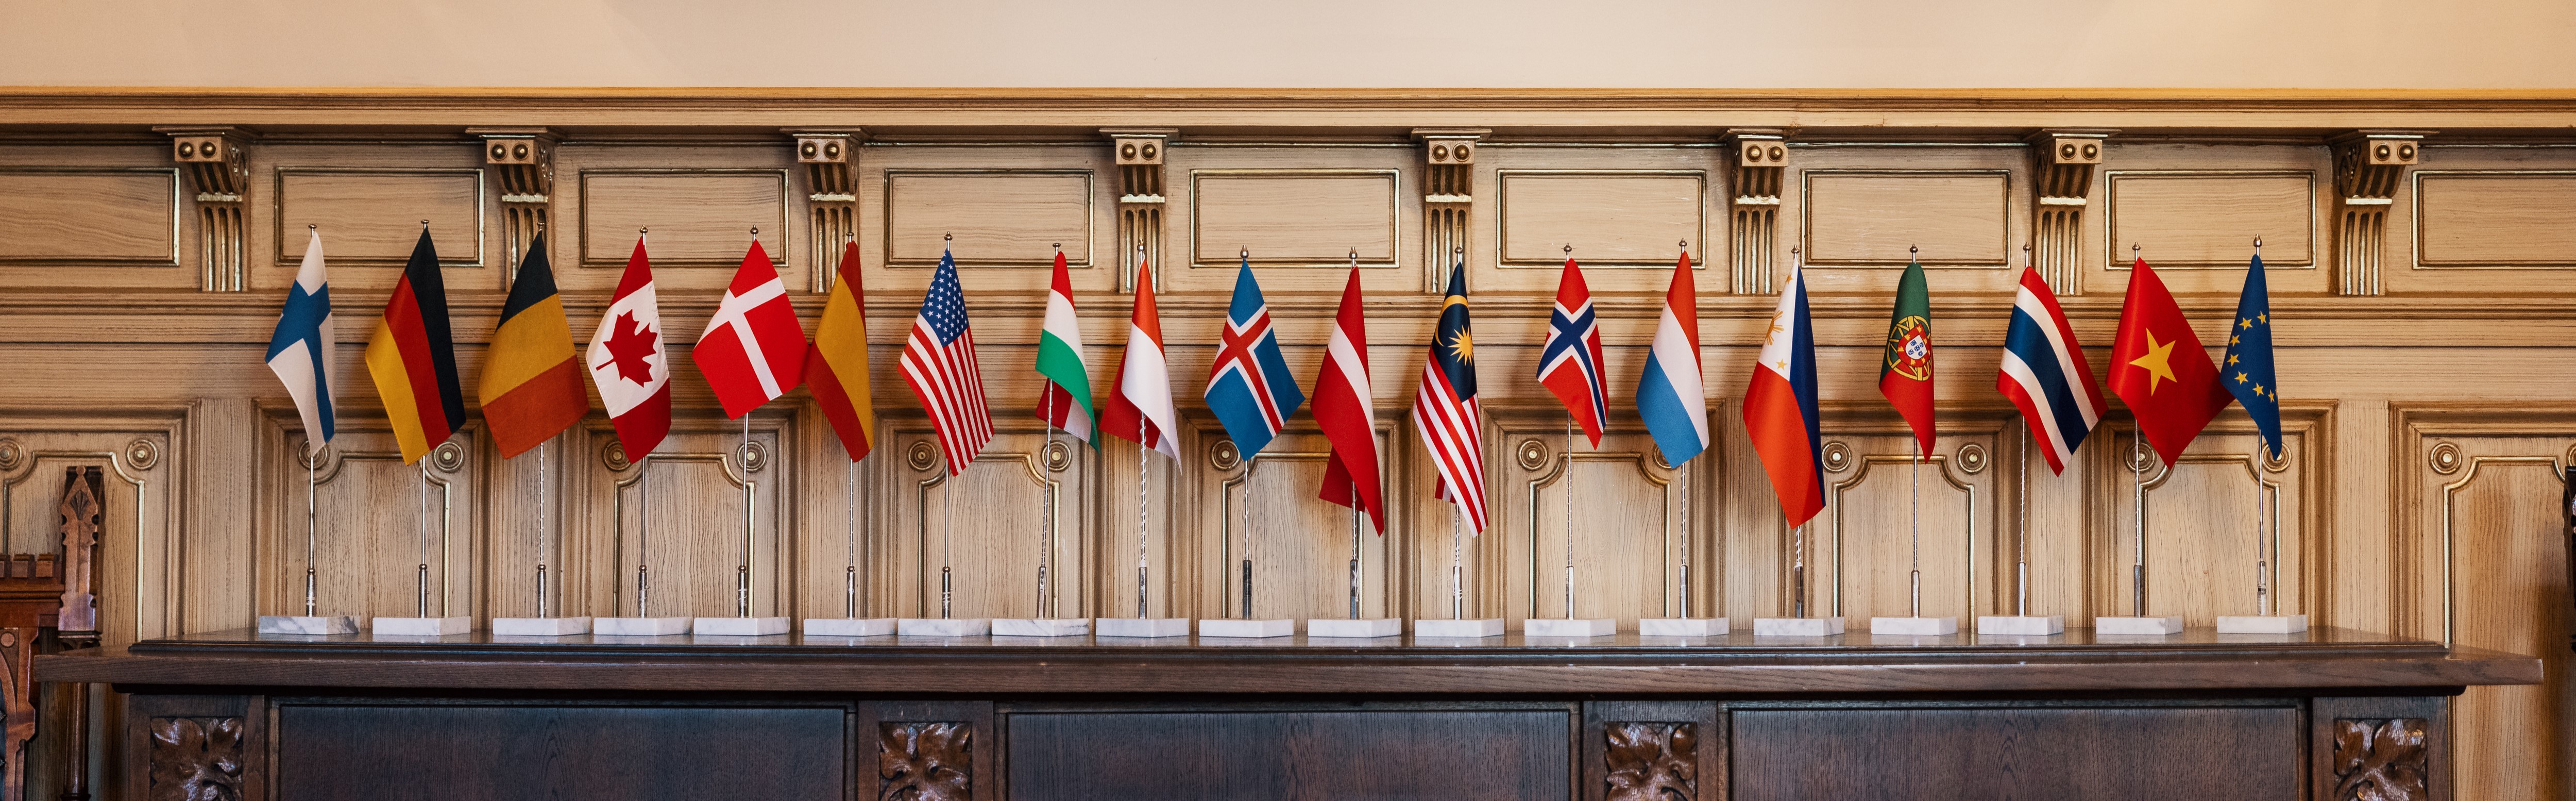 Several country flags on a table. From left to right: Finland, Germany, Belgium, Canada, Denmark, Spain, USA, Hungary, Indonesia, Iceland, Latvia, Malaysia, Norway, Netherlands, Philippines, Portugal, Thailand, Vietnam, and EU.